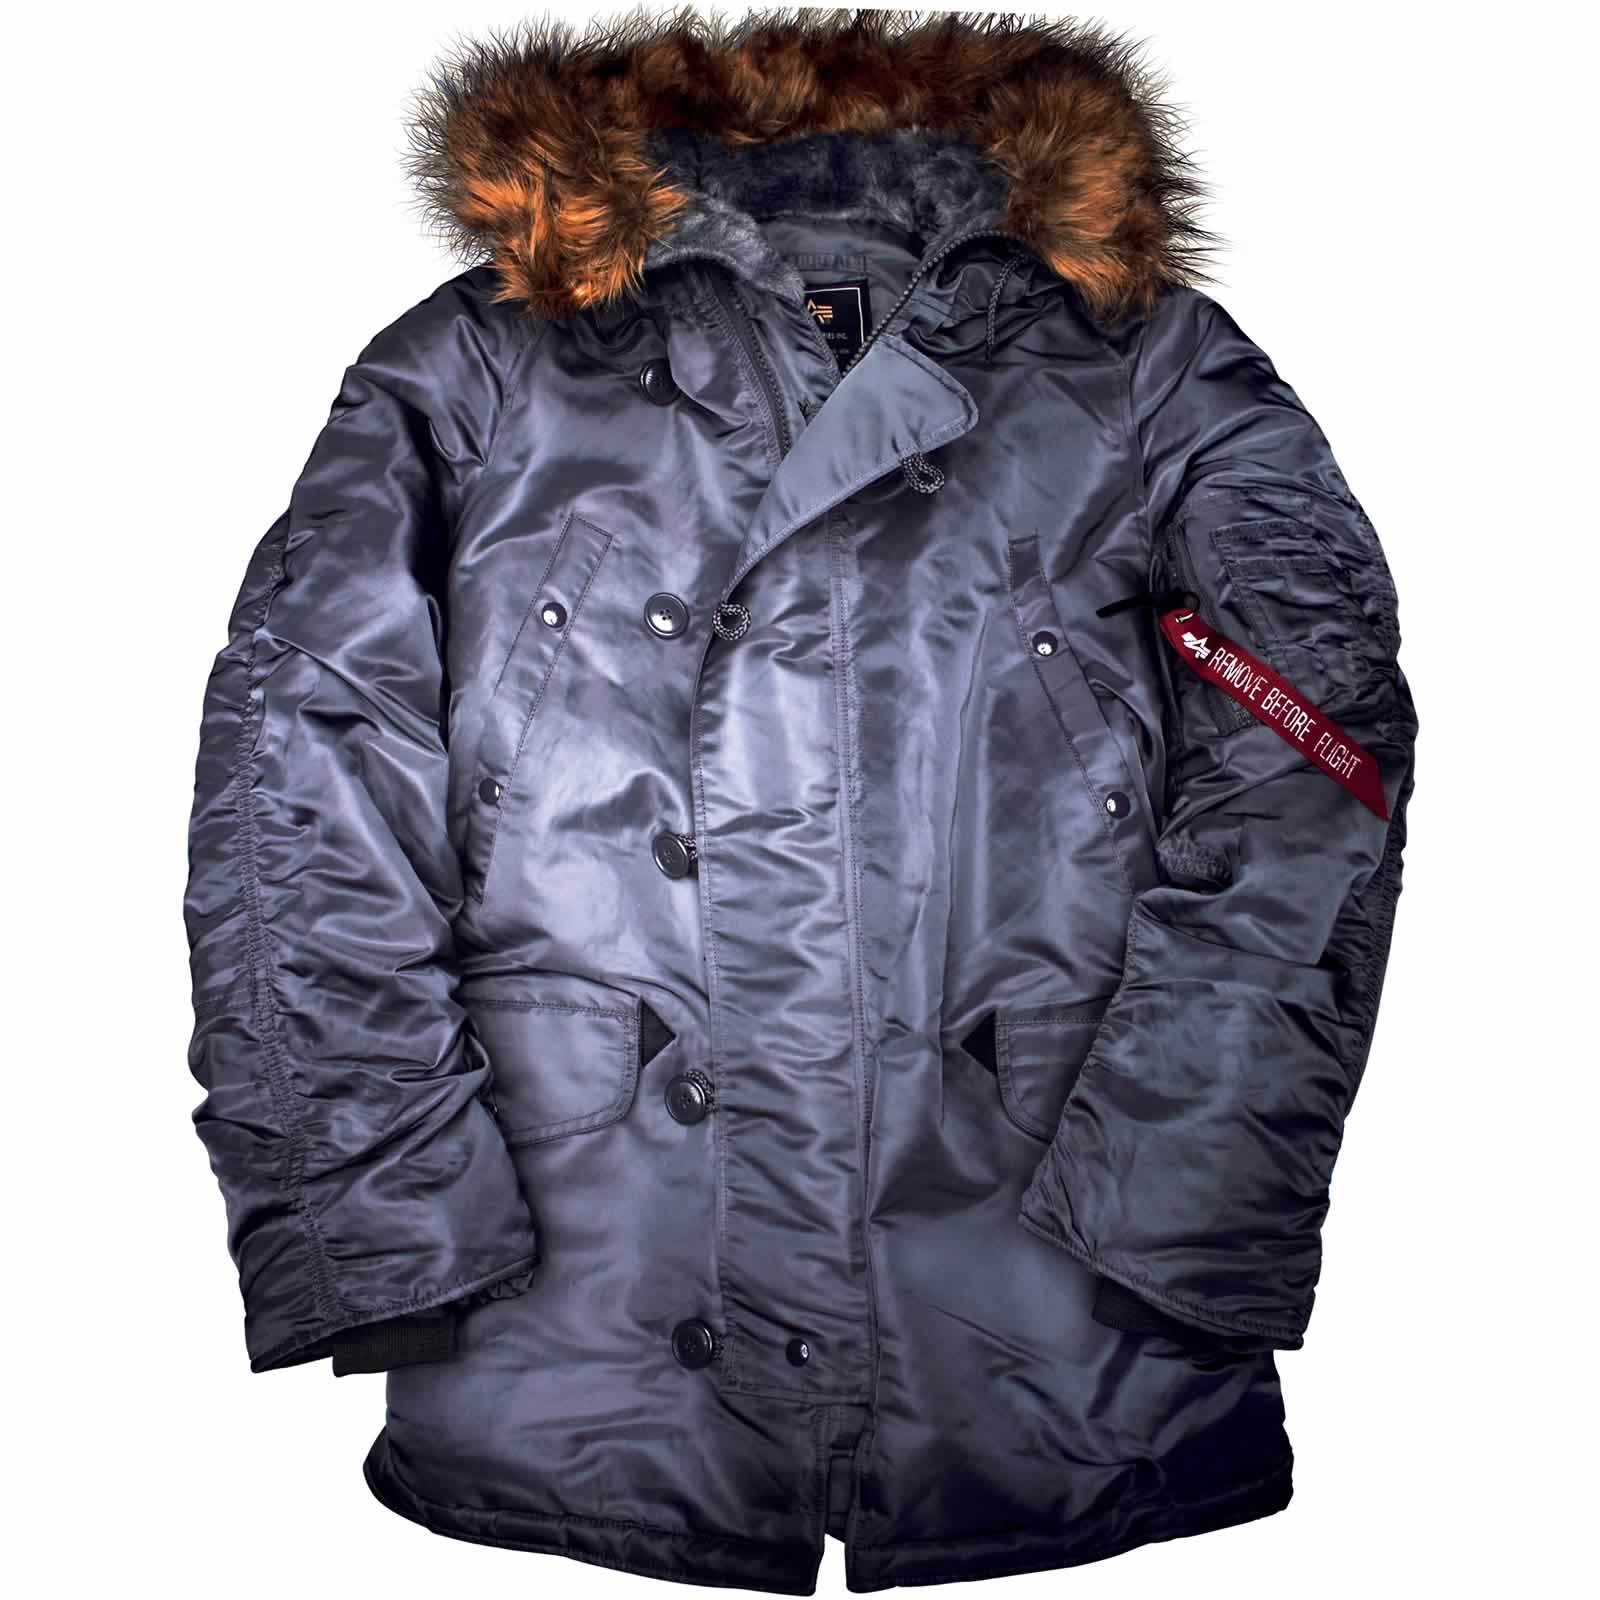 Best Extreme Cold Weather Jacket